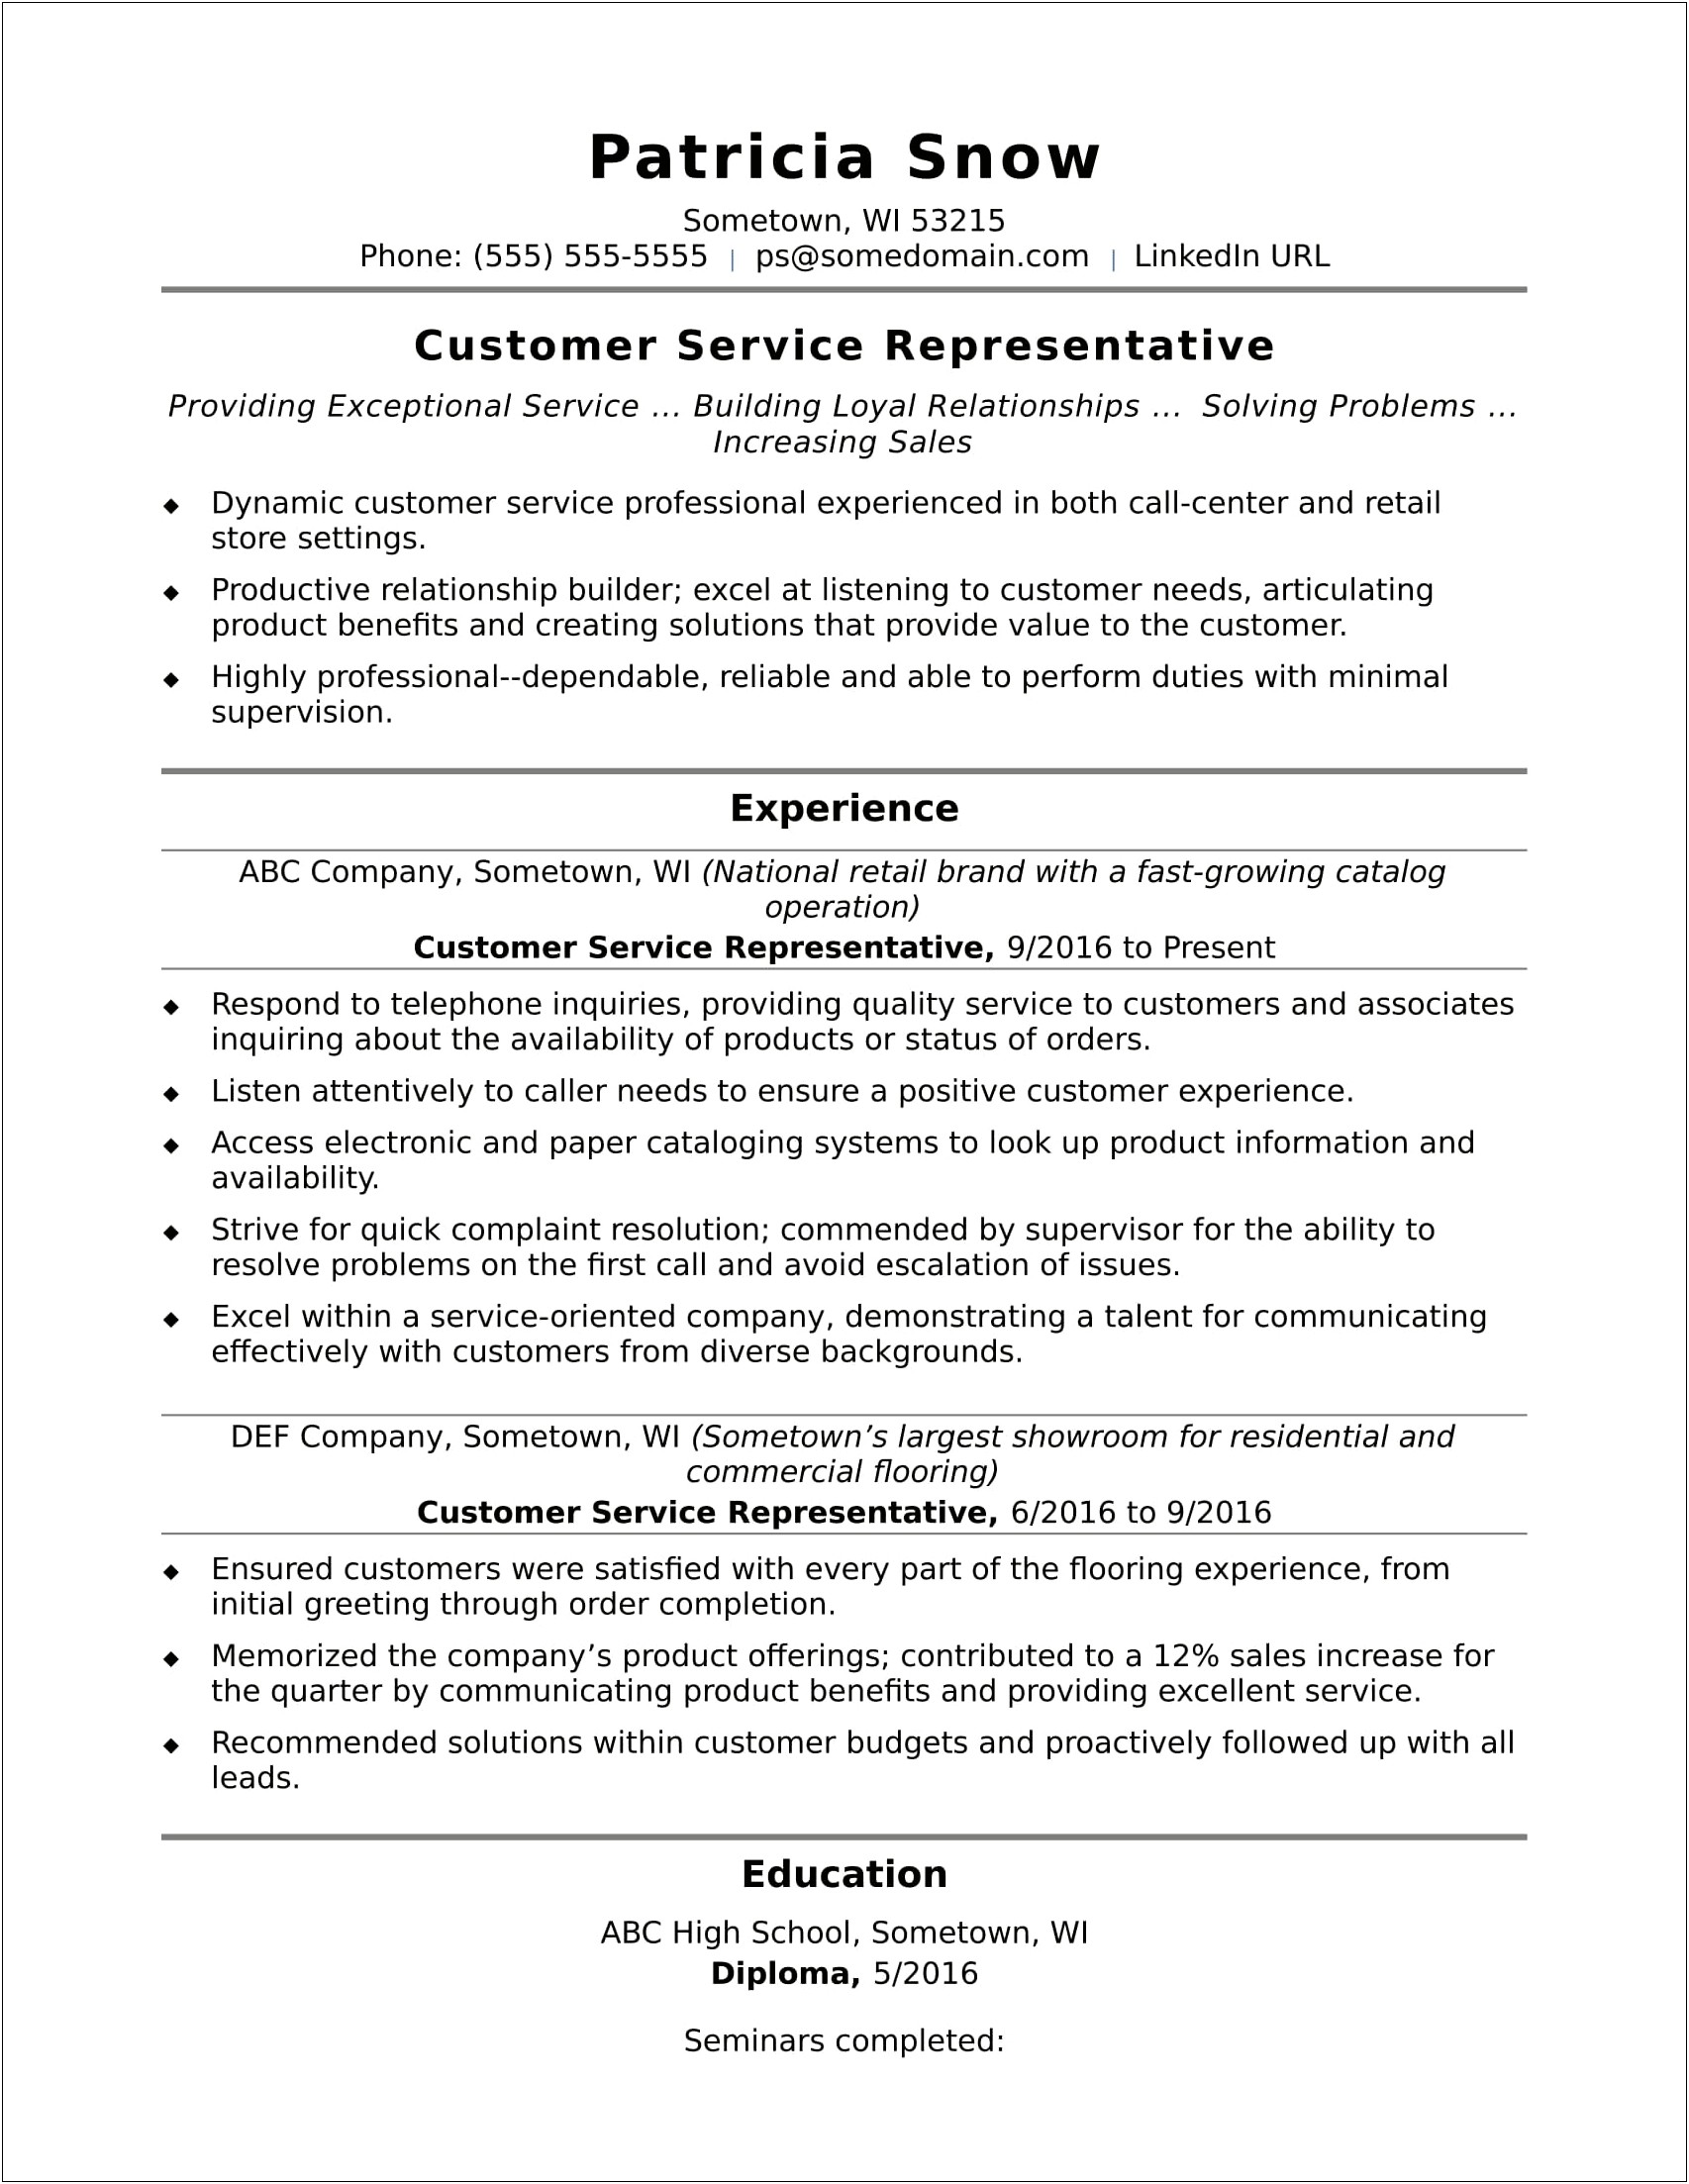 Texas State Career Services Resume Template